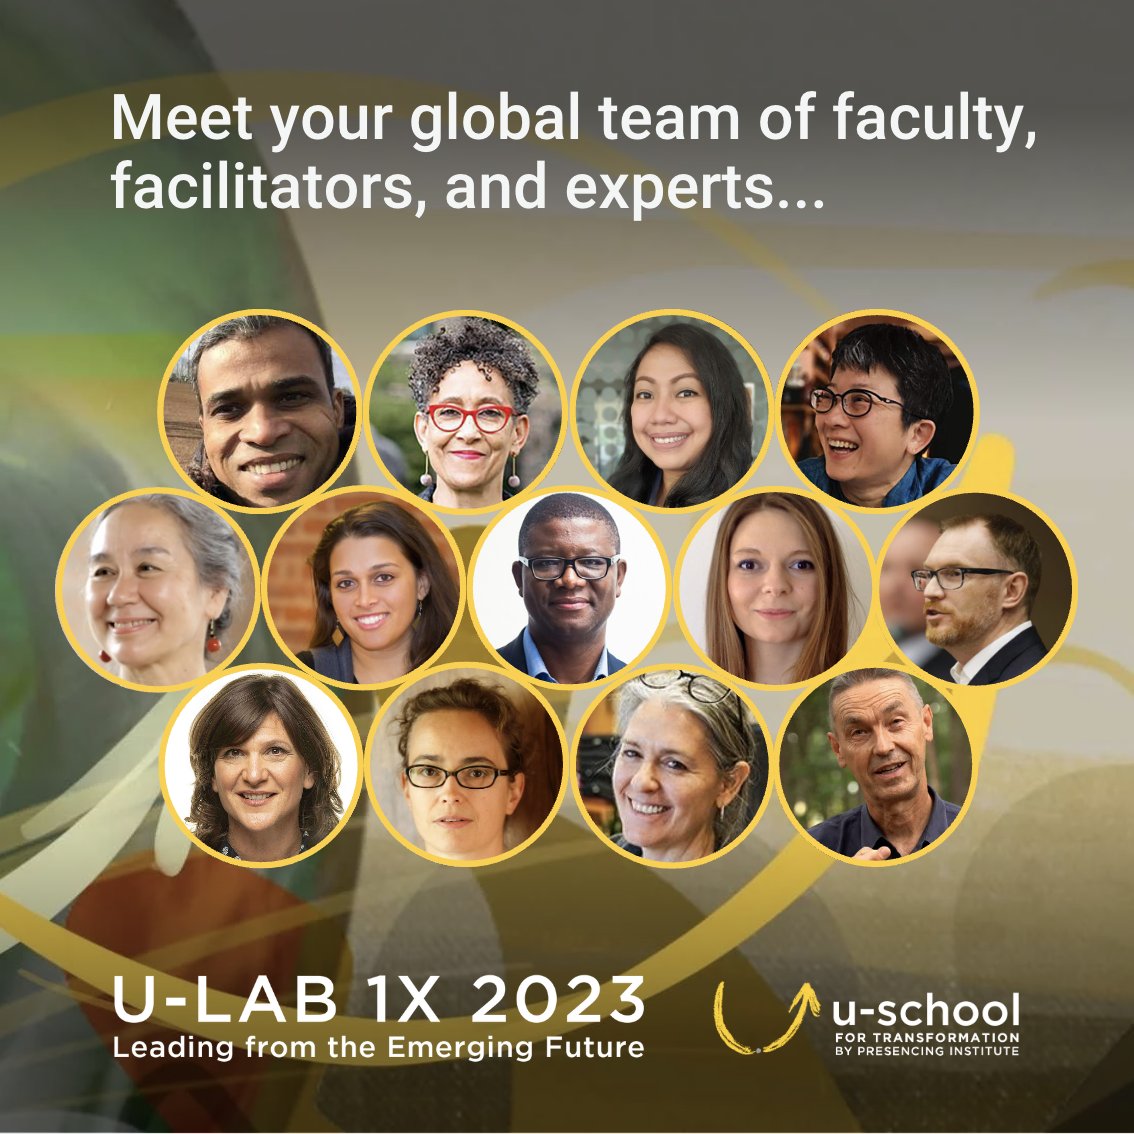 Meet your u-lab 1x 2023 global team: faculty, facilitators, experts & artists. Move from analysis-paralysis into action and connect with the future that wants to emerge. Enroll at: u-lab.org #ulab #systemschange #awareness #leadership #SPT #MITx #MOOC